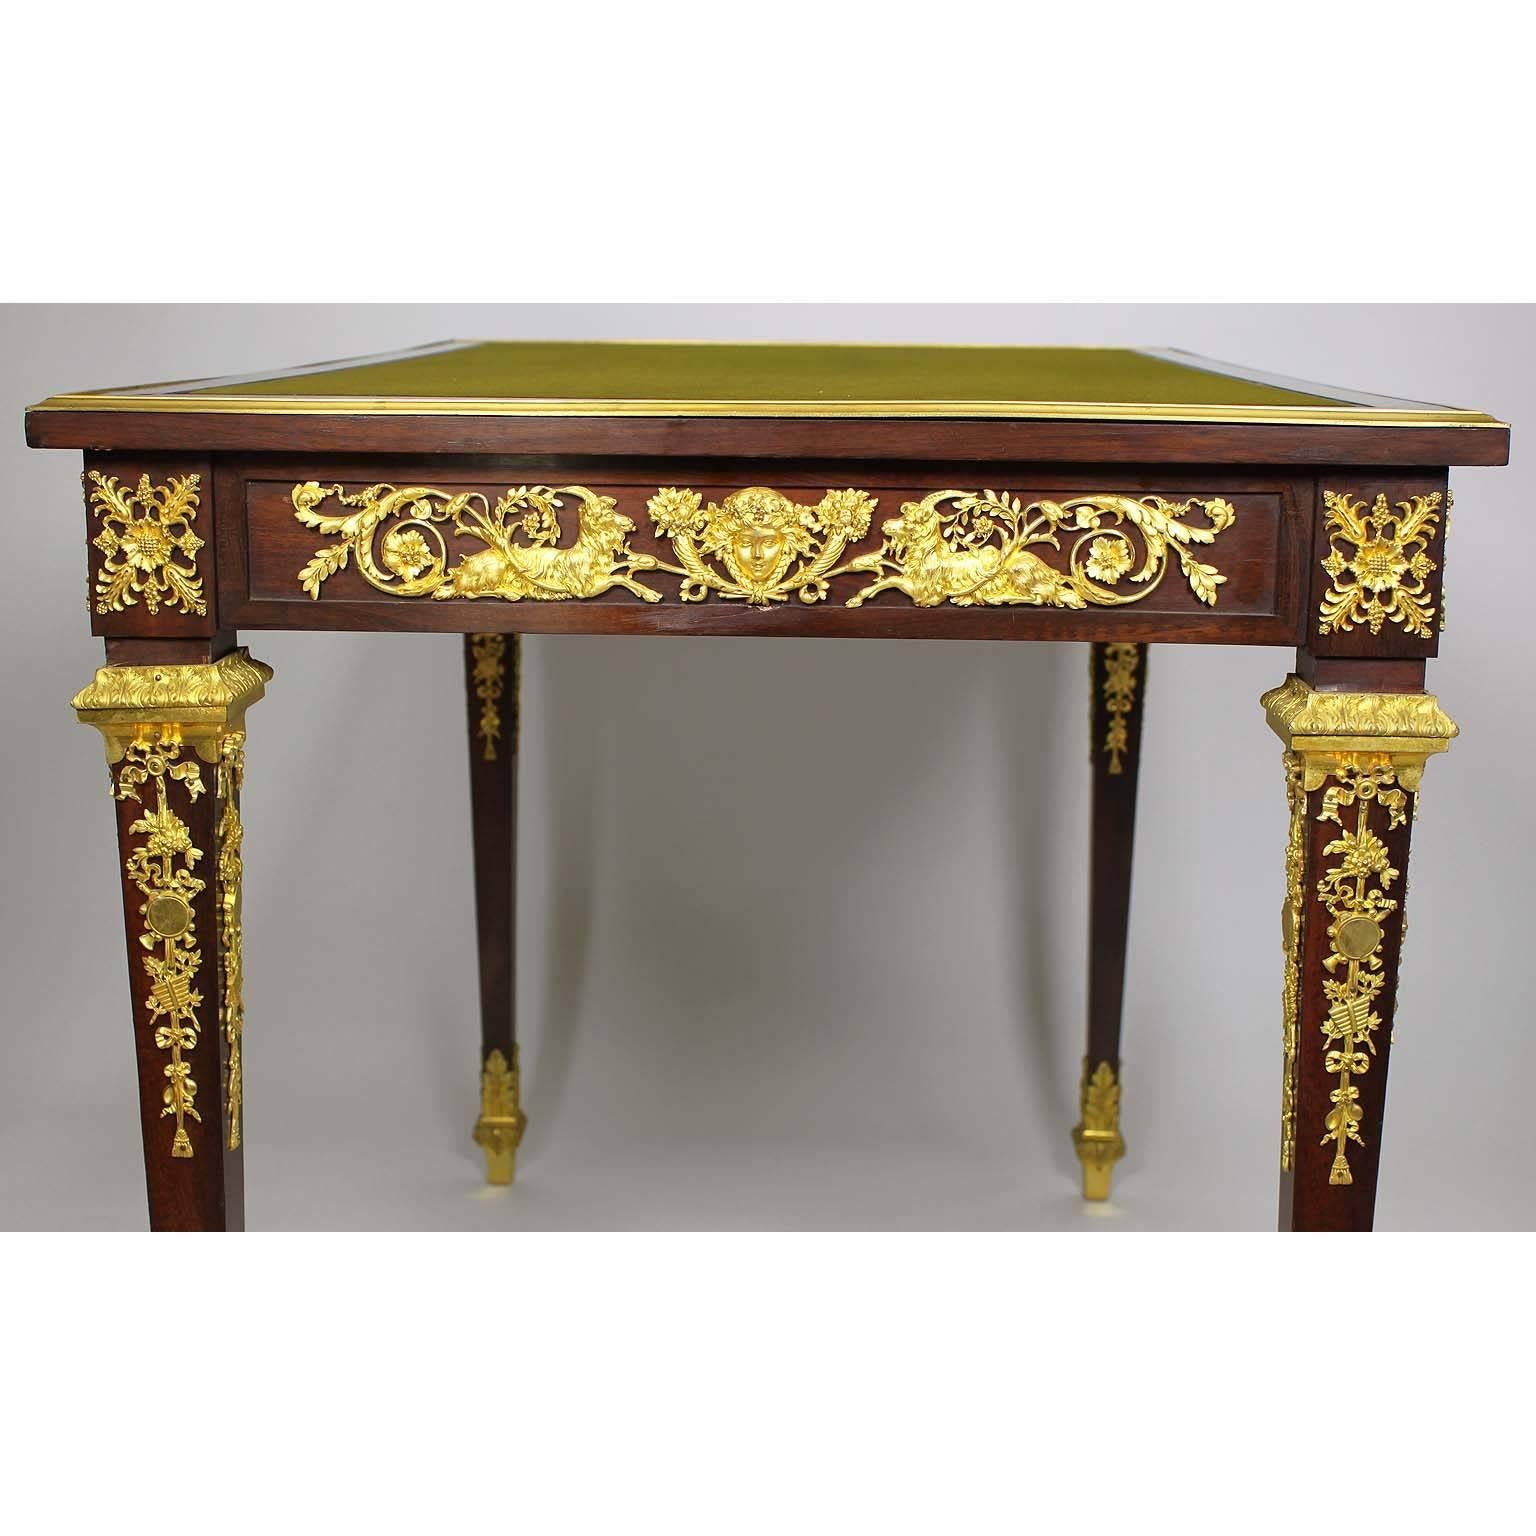 French 19th Century Louis XVI Style Mahogany and Ormolu Mounted Desk by Grimard For Sale 3